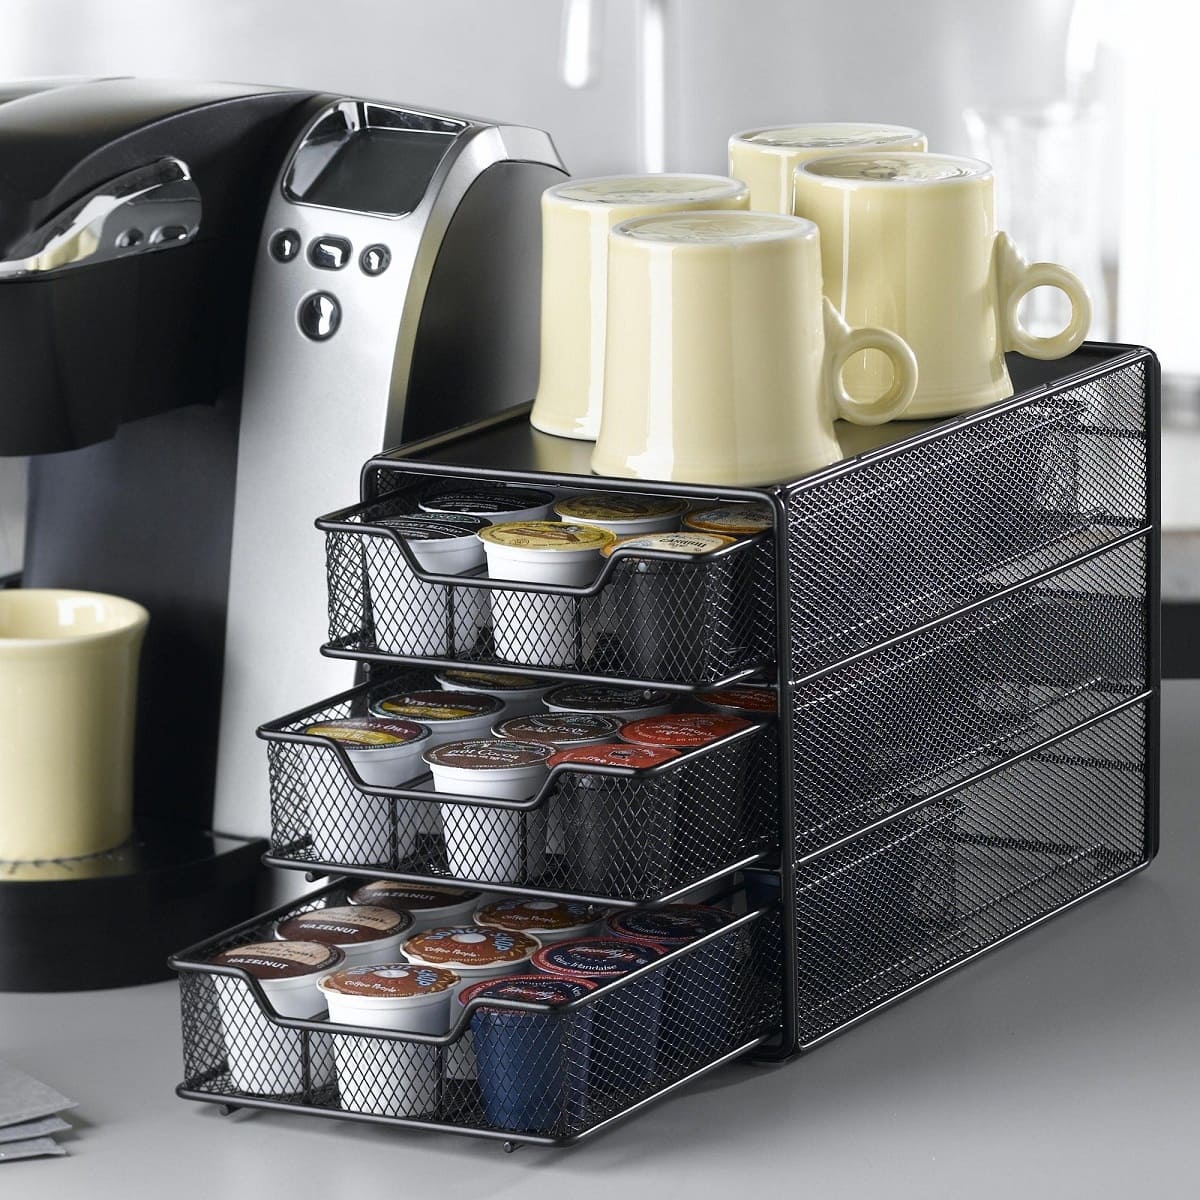 How To Store Keurig Pods